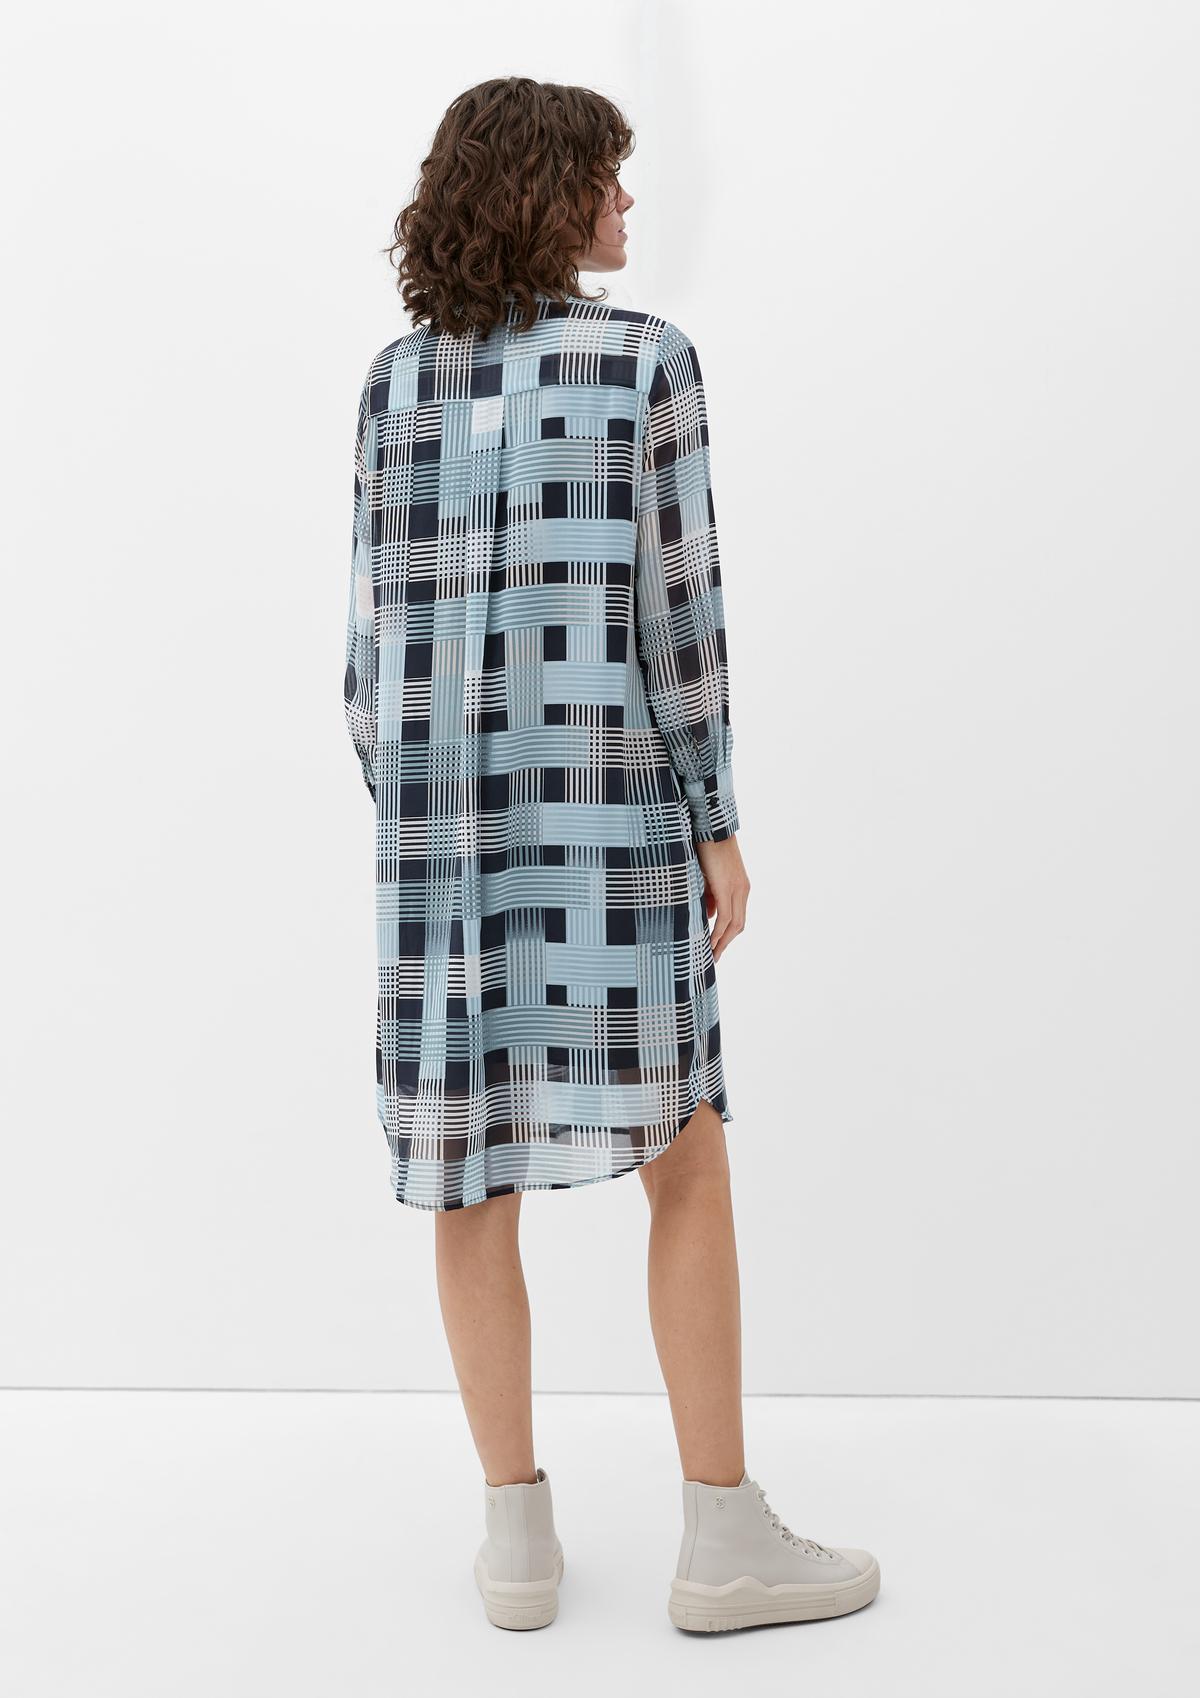 s.Oliver Checked blouse dress